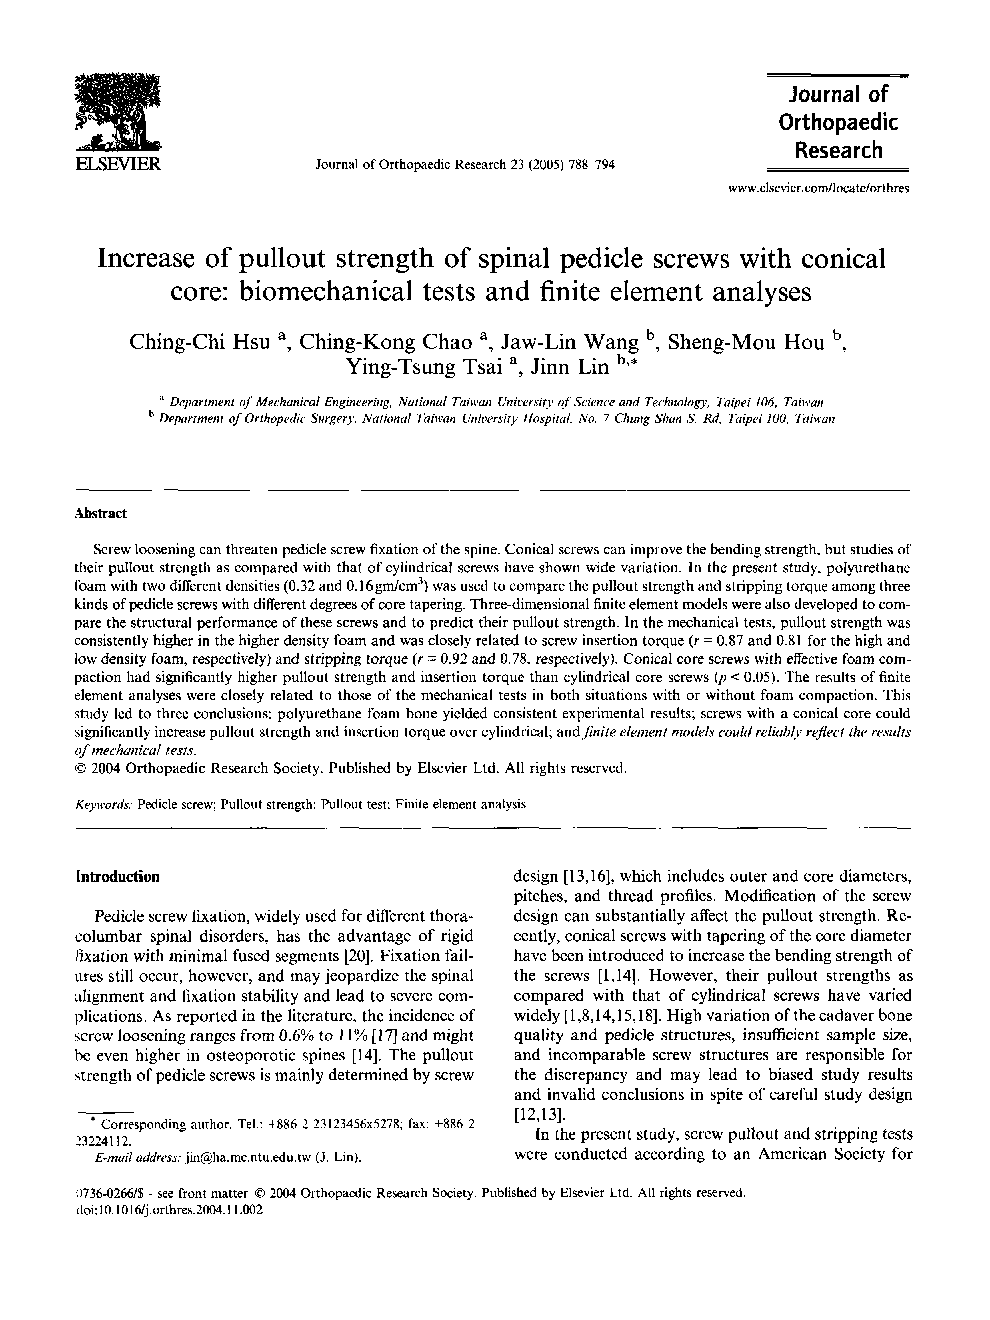 Increase of pullout strength of spinal pedicle screws with conical core: biomechanical tests and finite element analyses